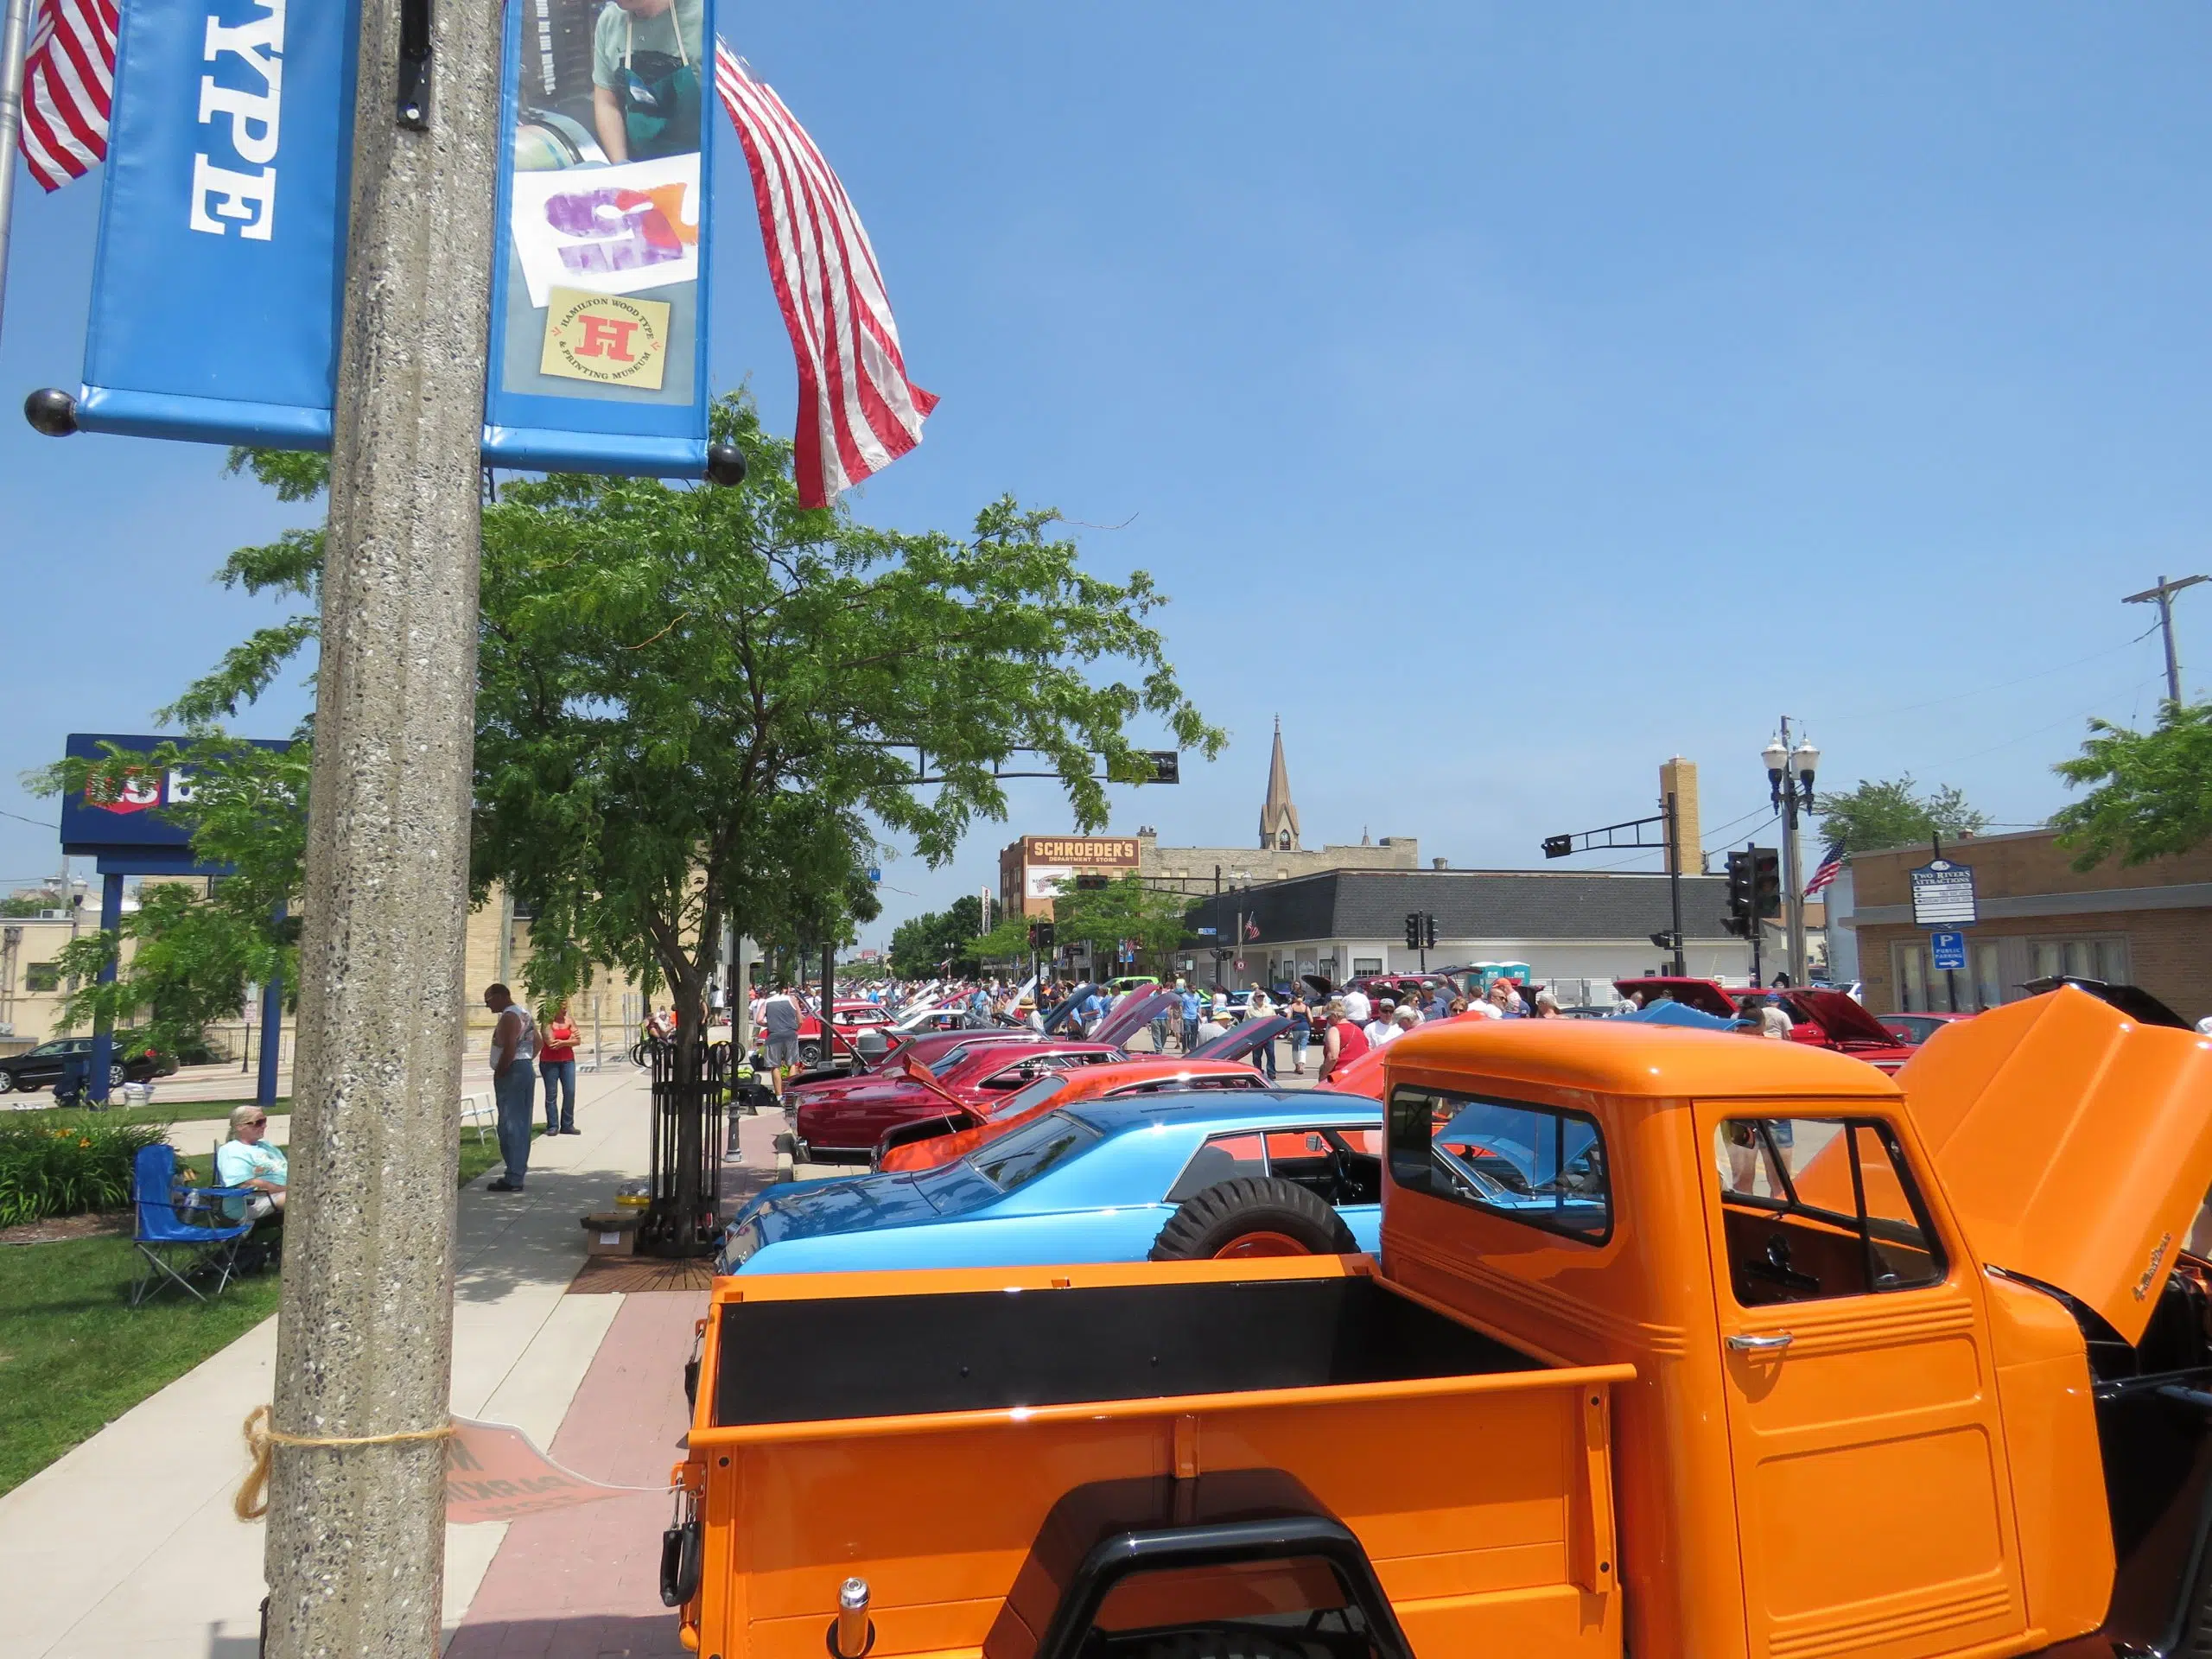 Hundreds of Classic Cars Will Converge on Two Rivers This Weekend